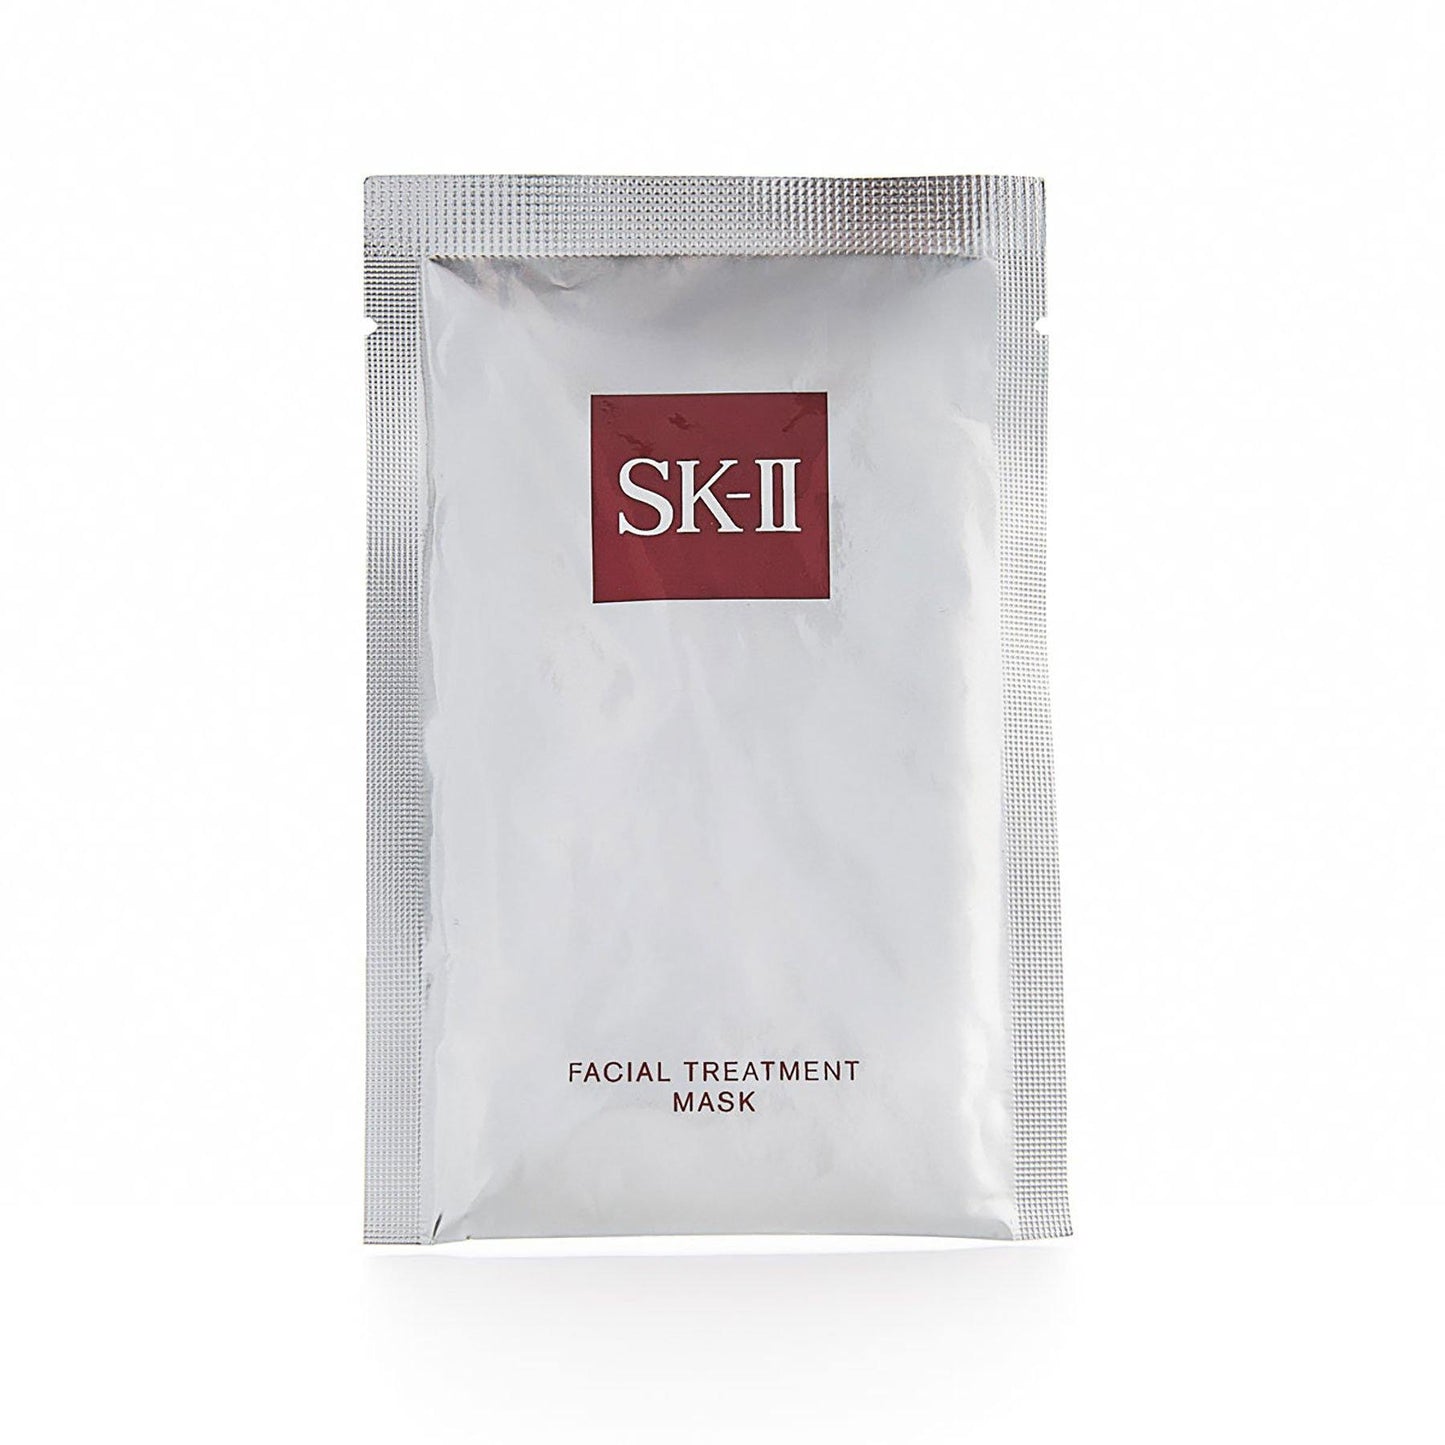 Facial Treatment Mask 10 count - Cosmos Boutique New Jersey